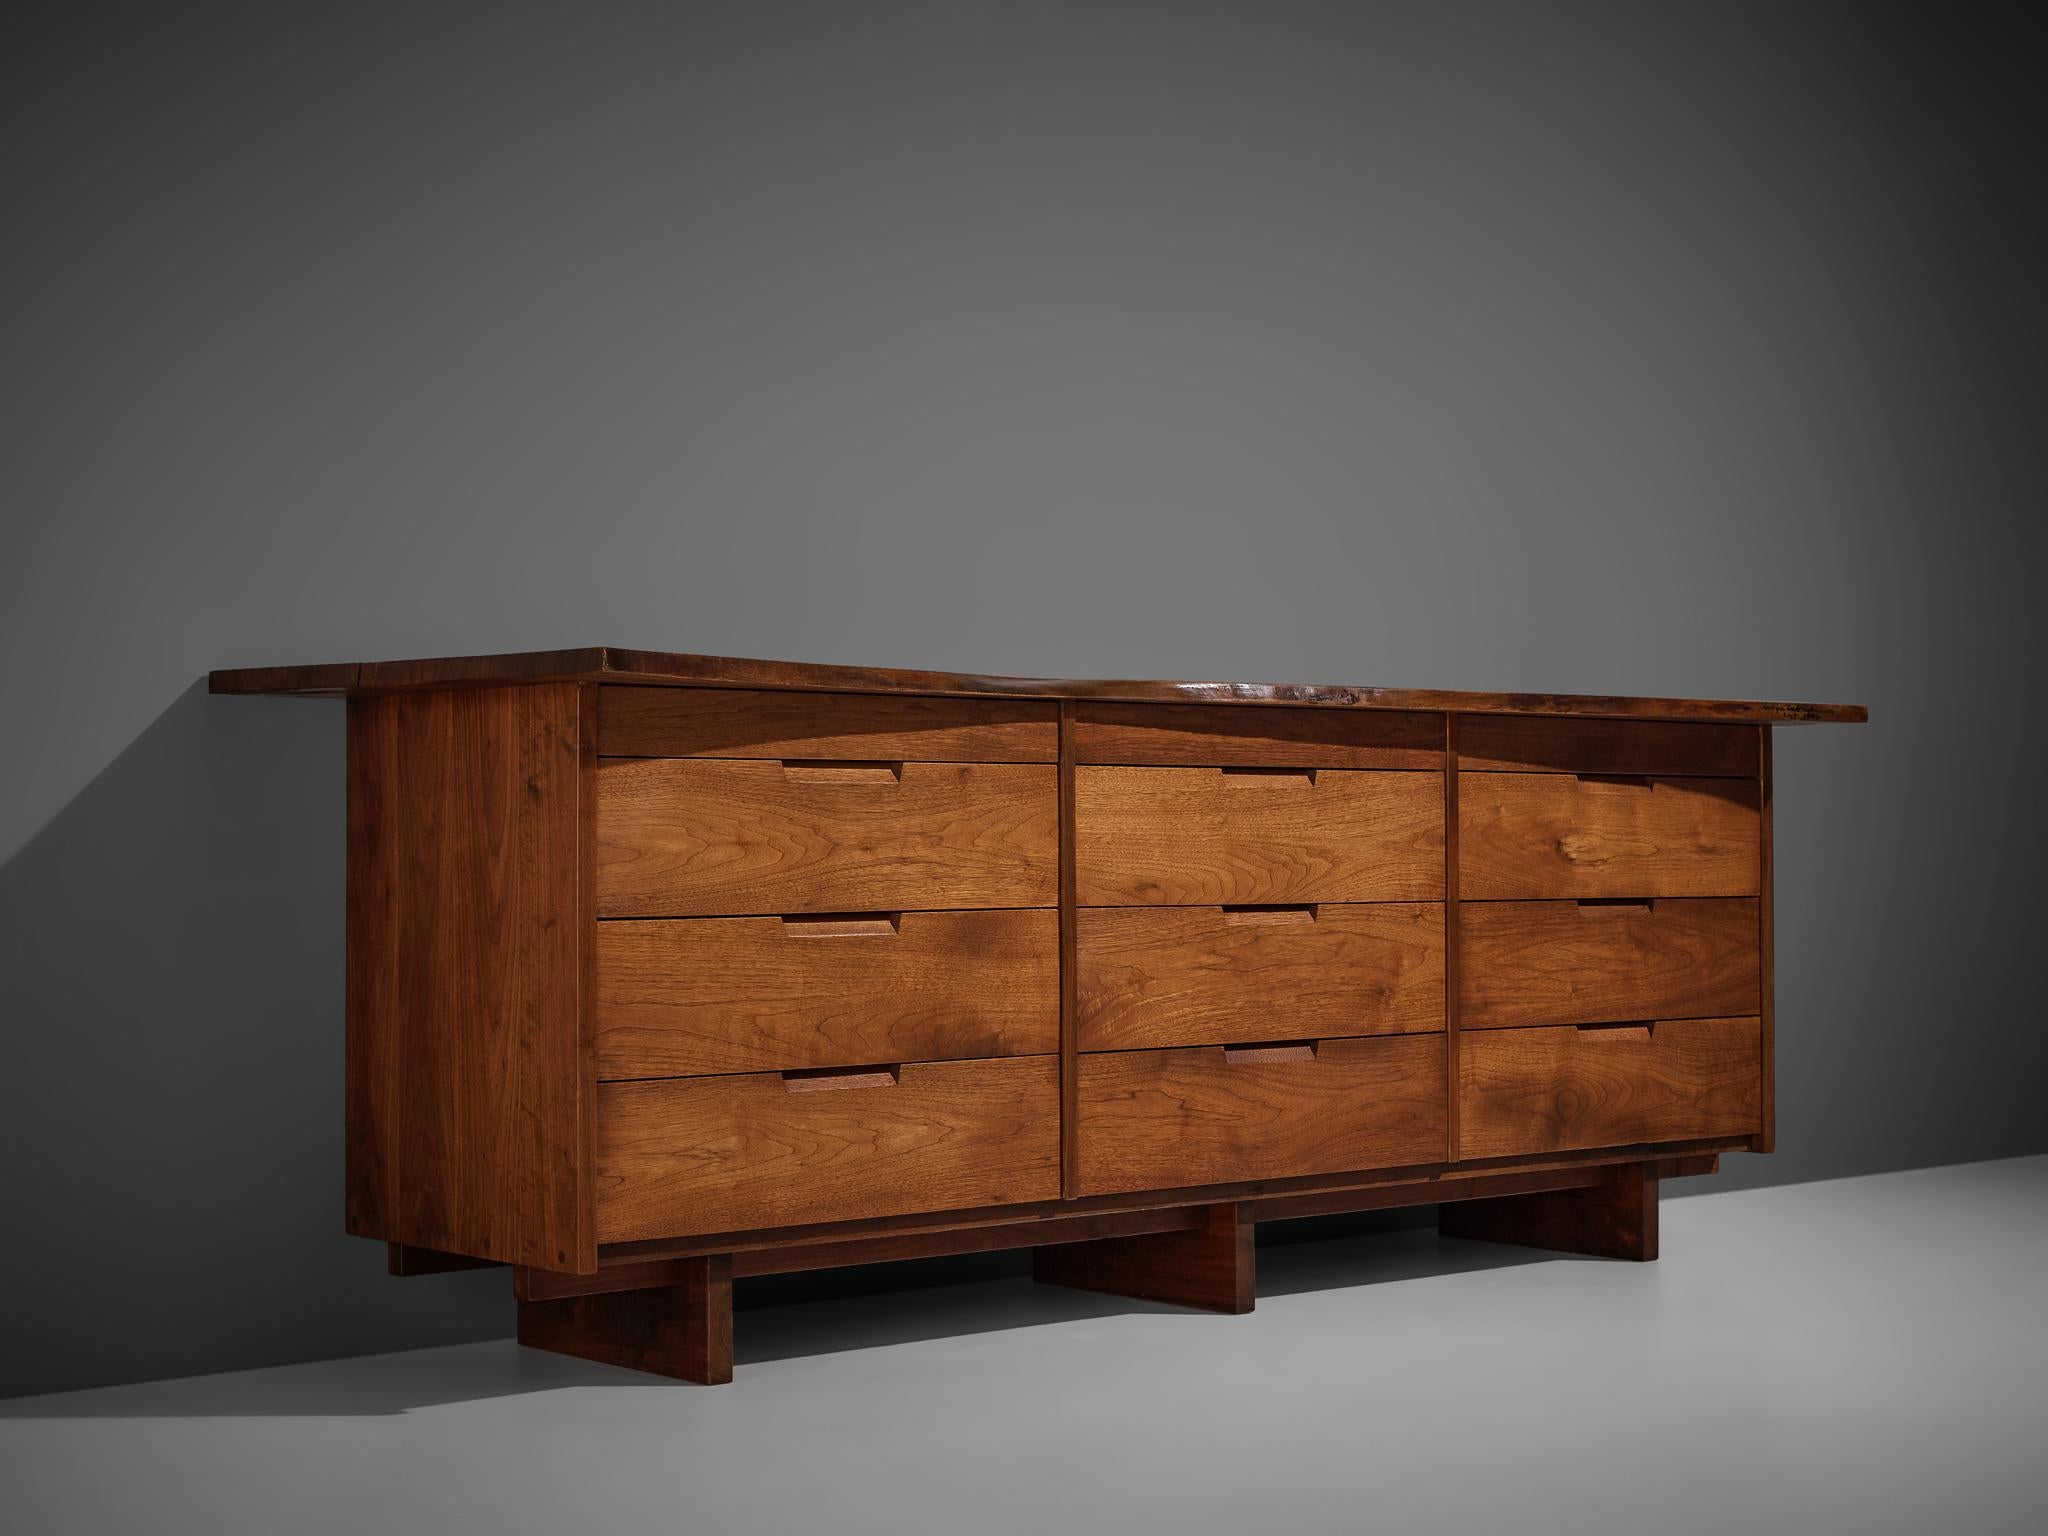 George Nakashima, sideboard, walnut, rosewood, New Hope, PA, United States, 1966

This long sideboard features twelve drawers under a free edge top with overhang. Executed in warm colored walnut this sideboard shows typical Nakashima features like